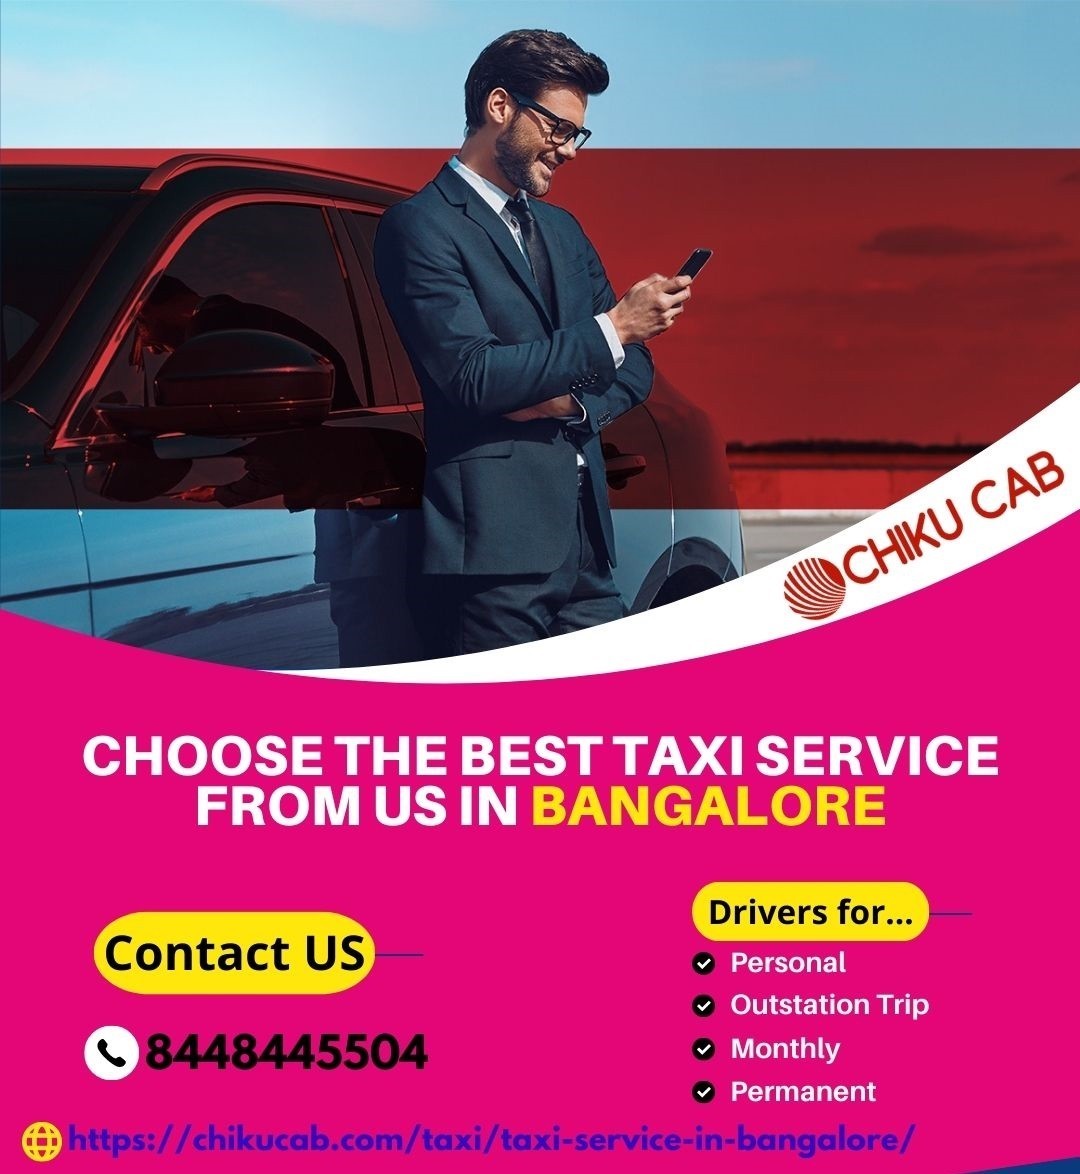 Choose the Best Cab Services from Us in Bangalore